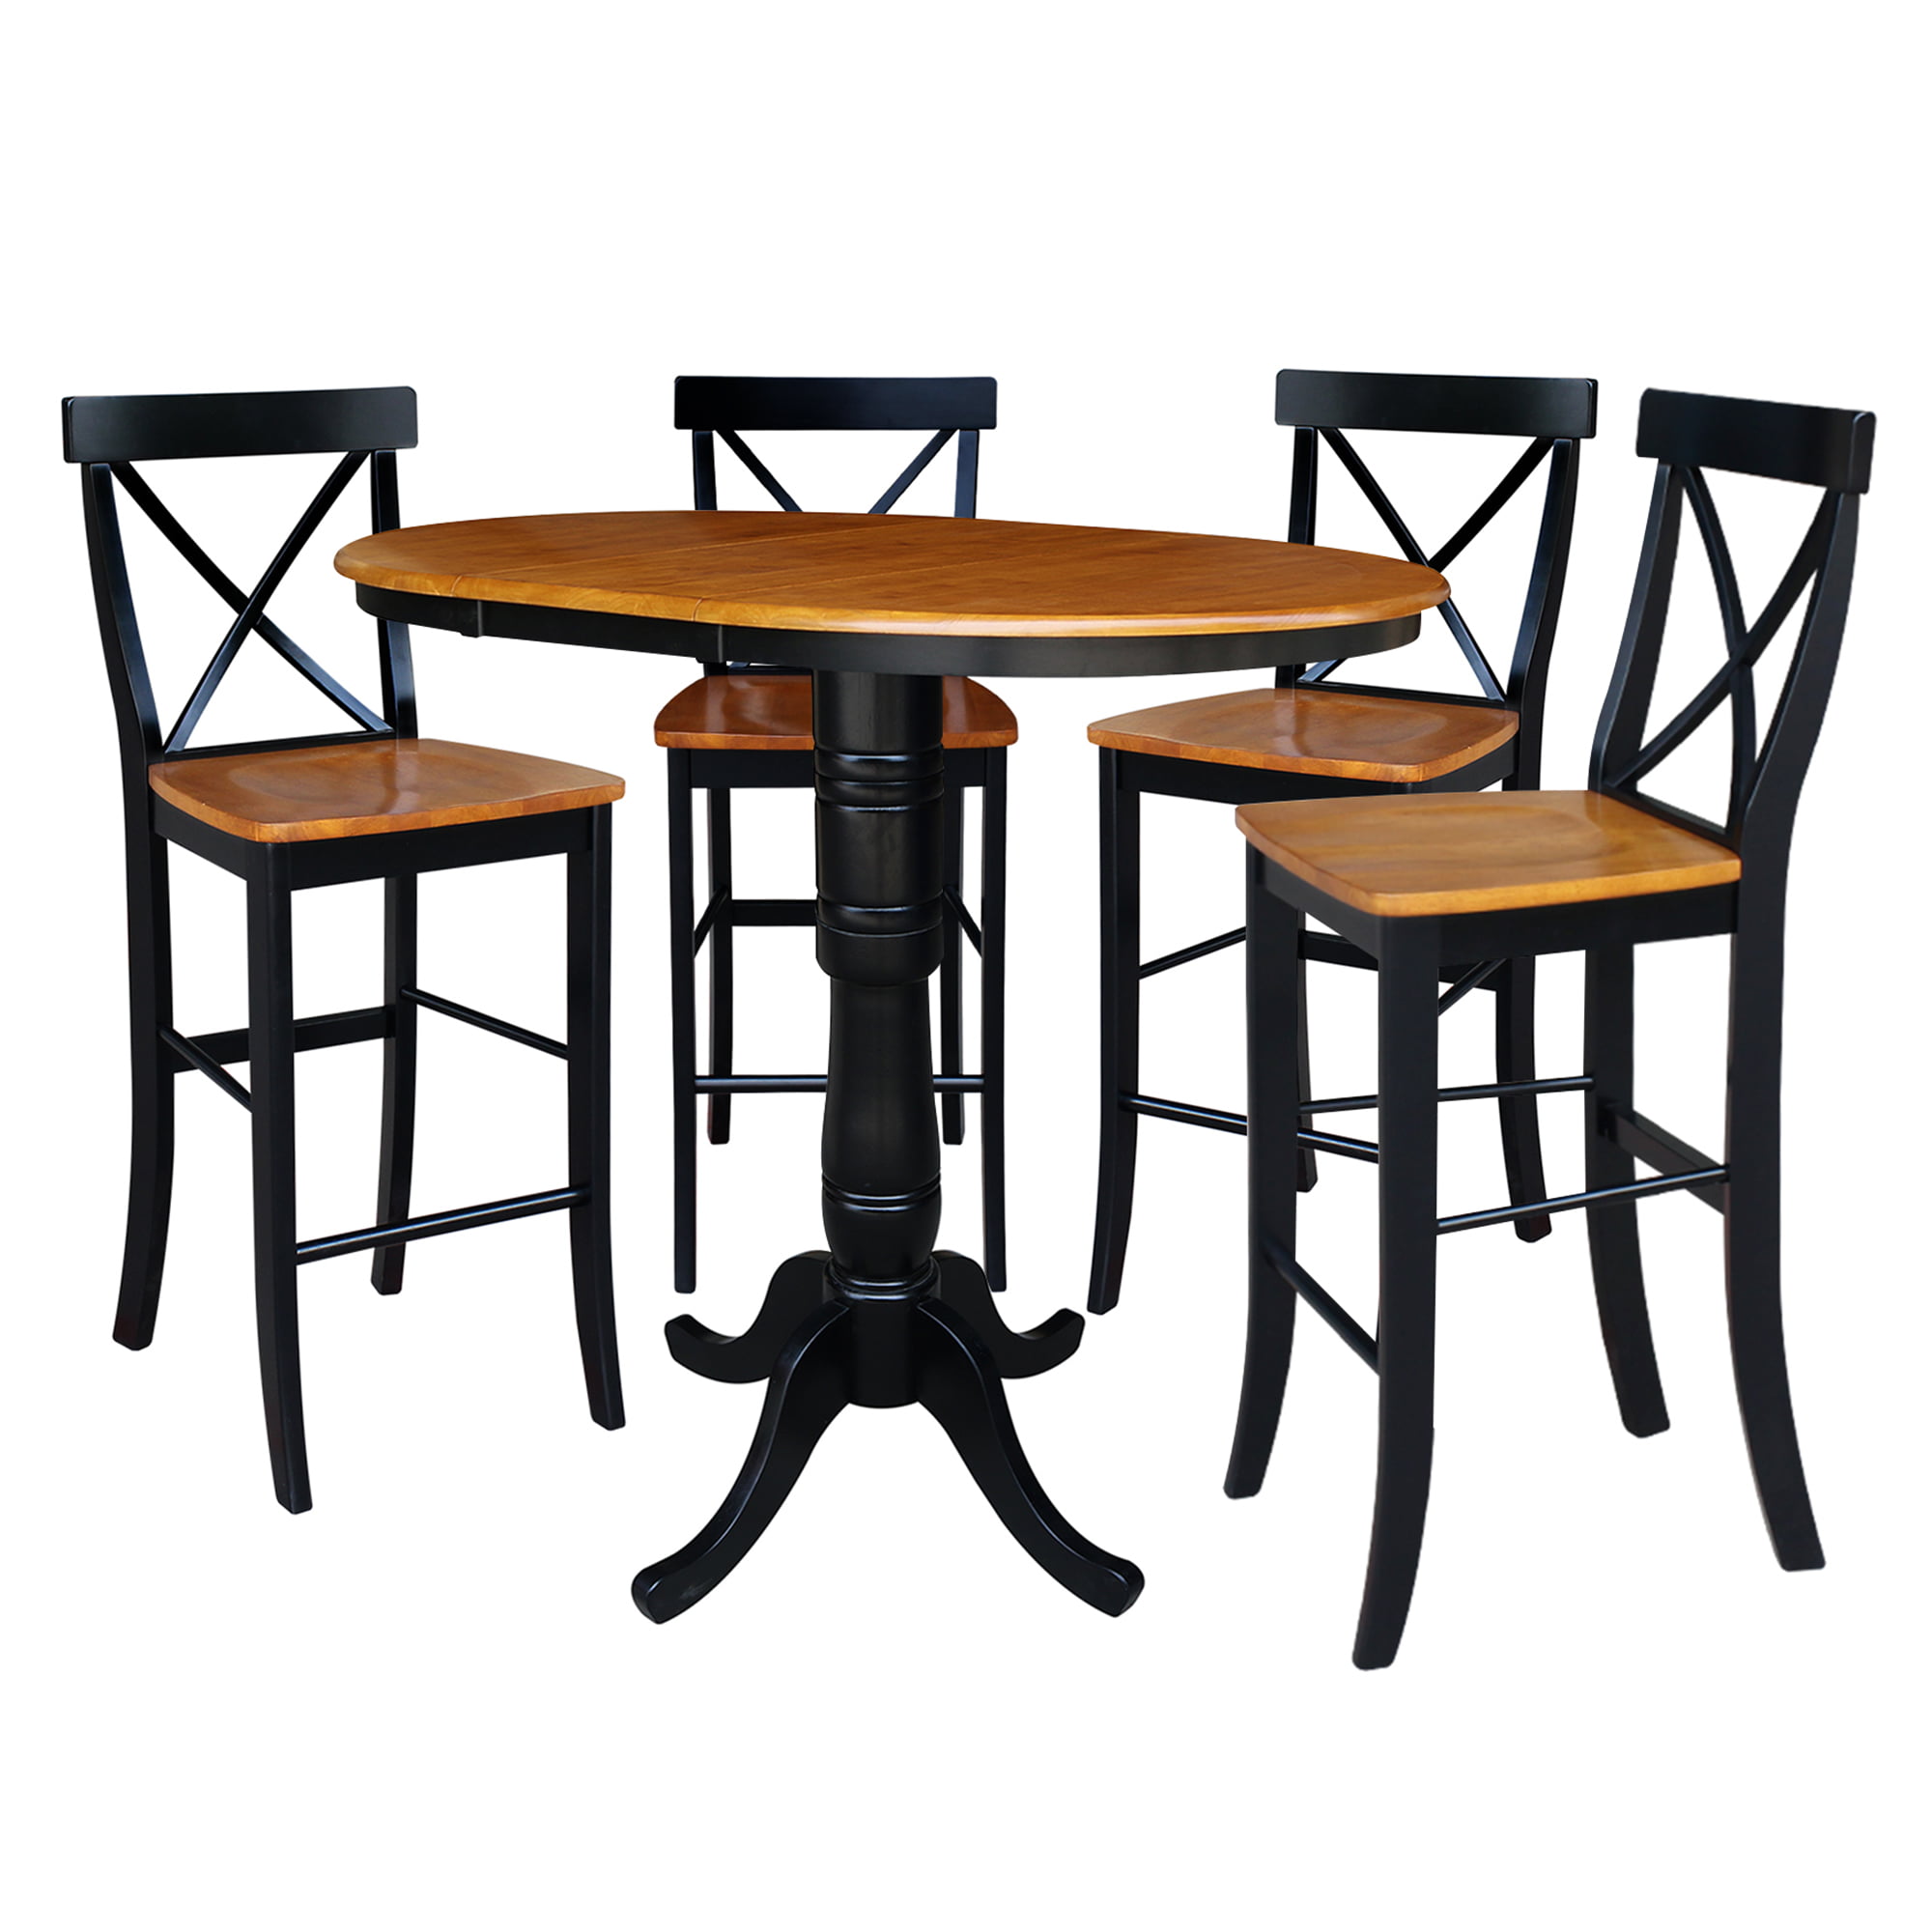 36" Round Bar Height Table with 12" Leaf and 4 Xback Stools Black